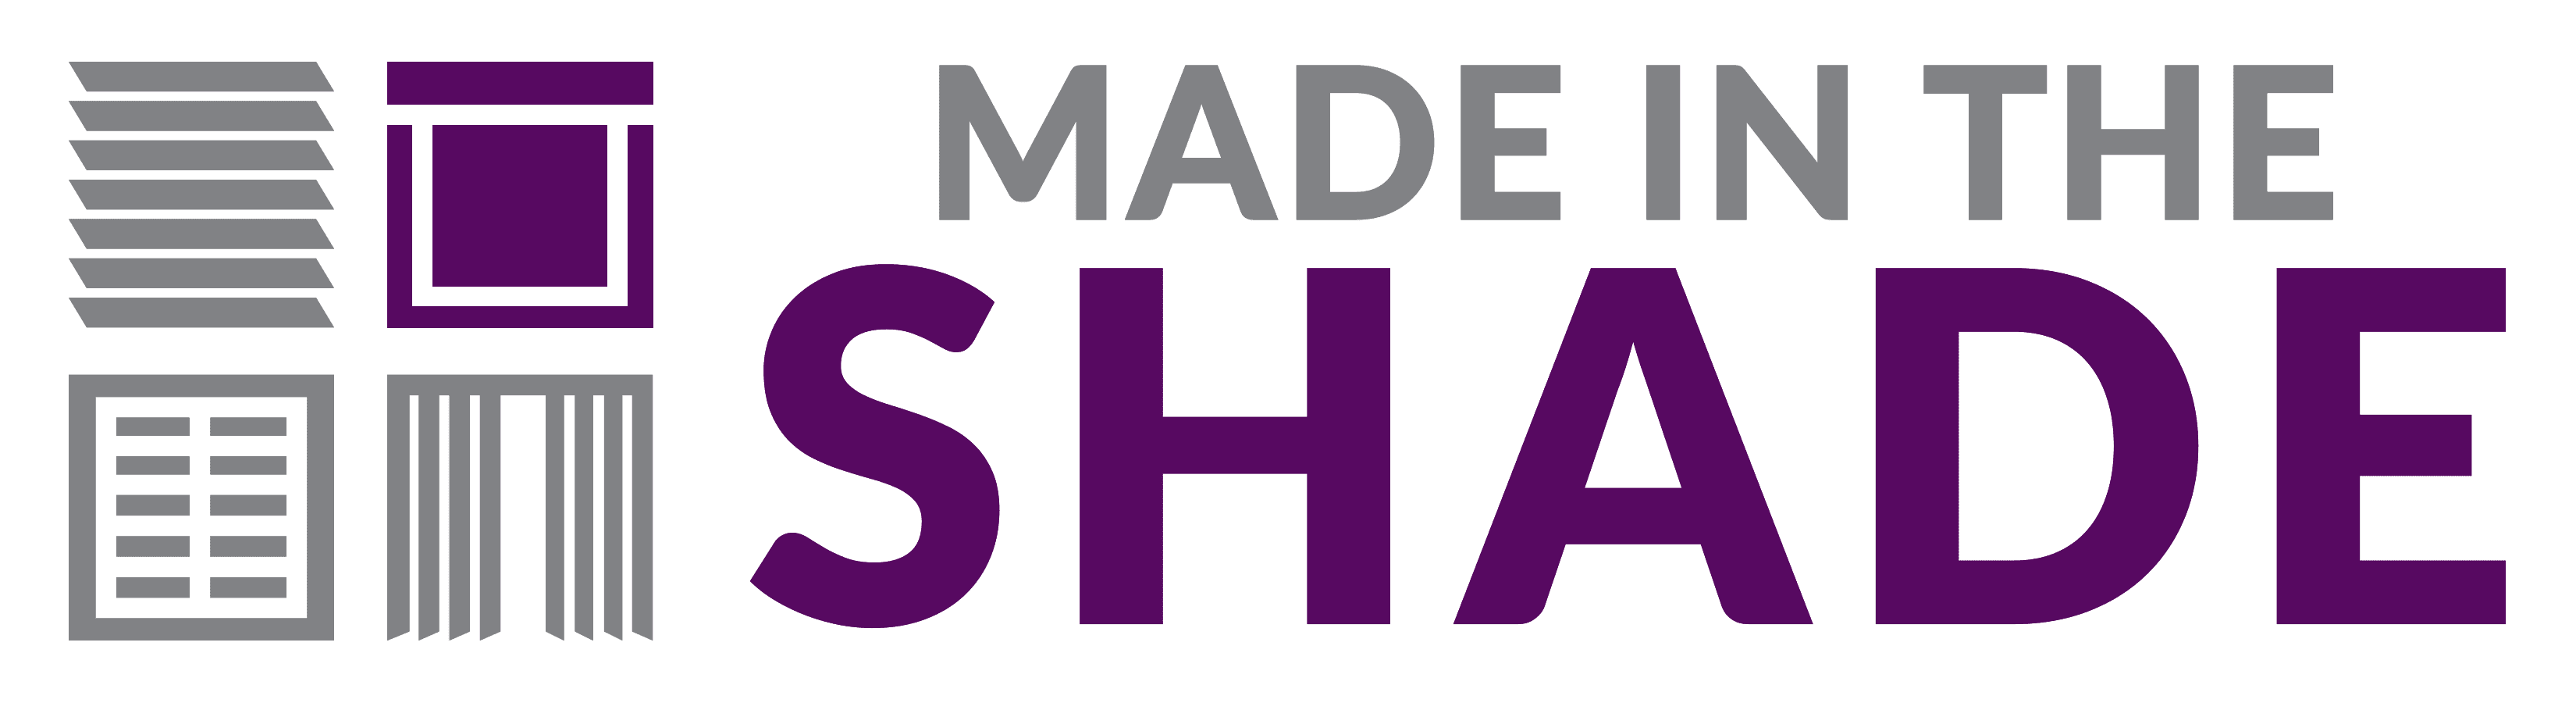 made-in-the-shade-logo